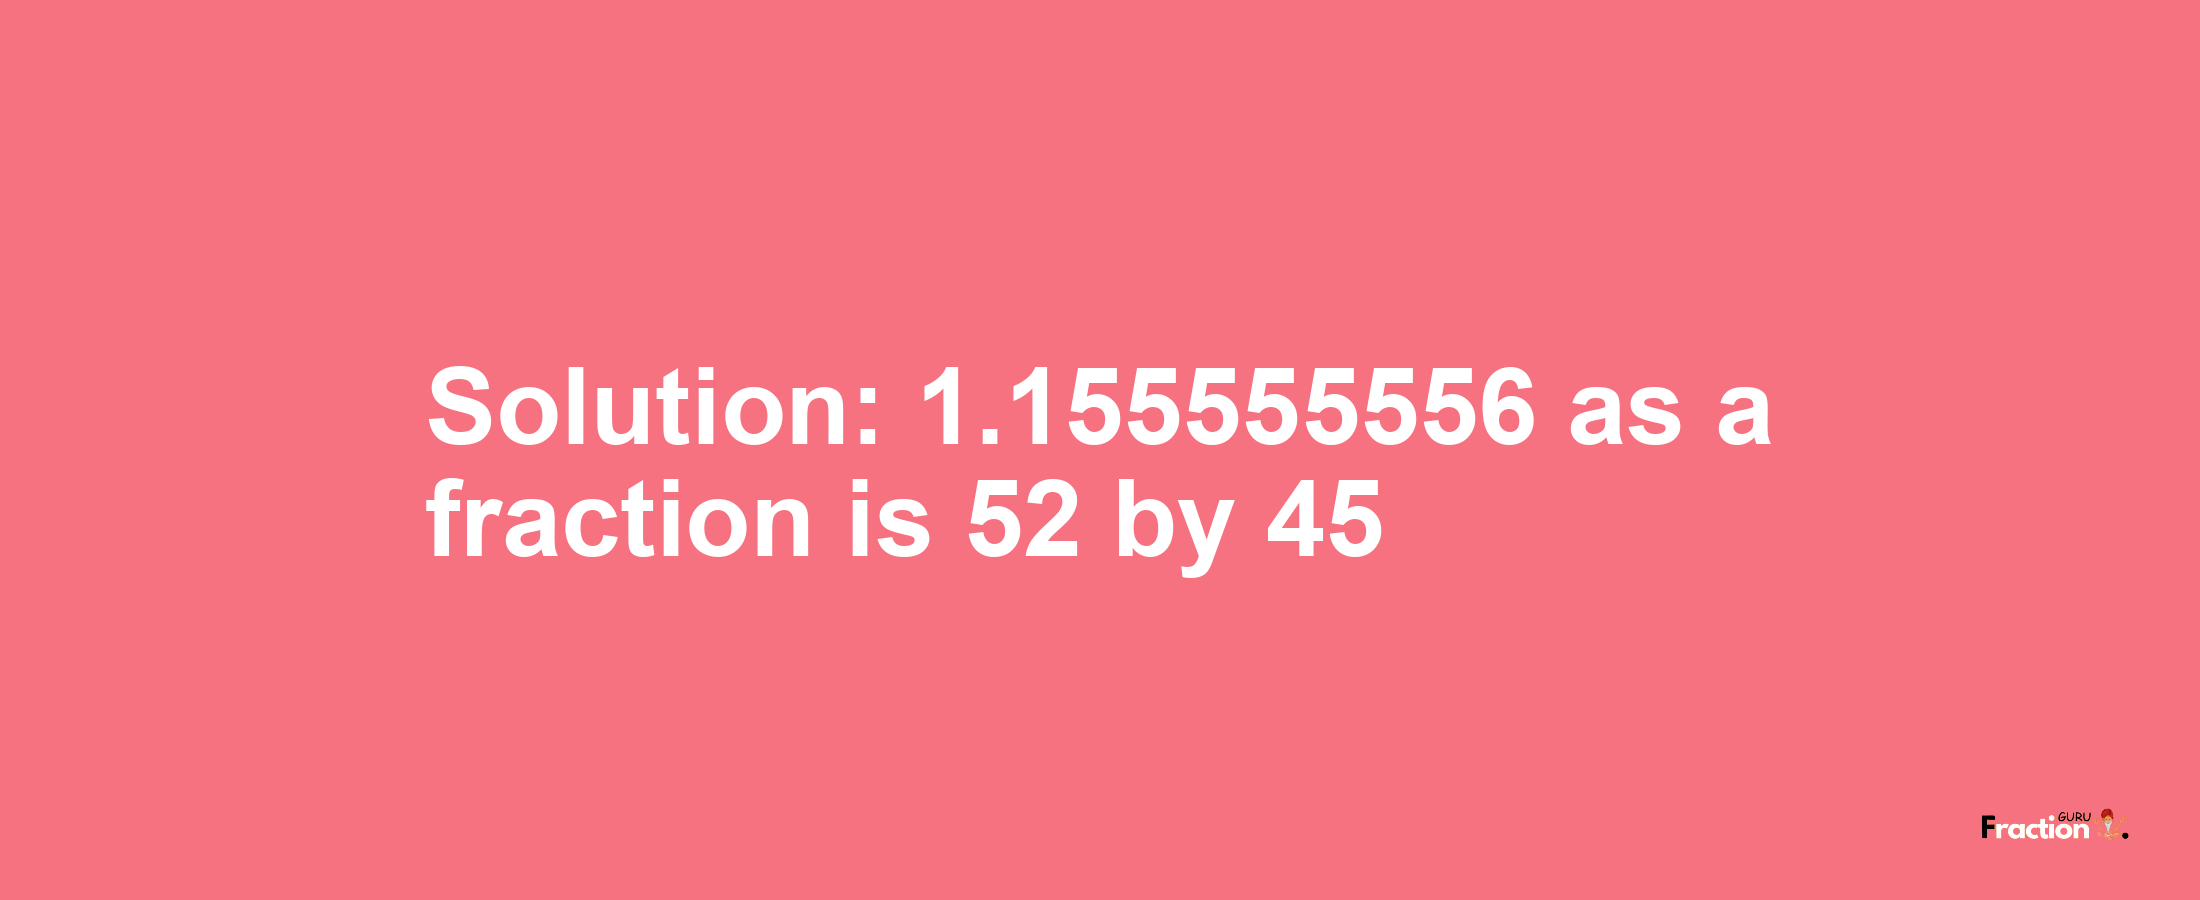 Solution:1.155555556 as a fraction is 52/45